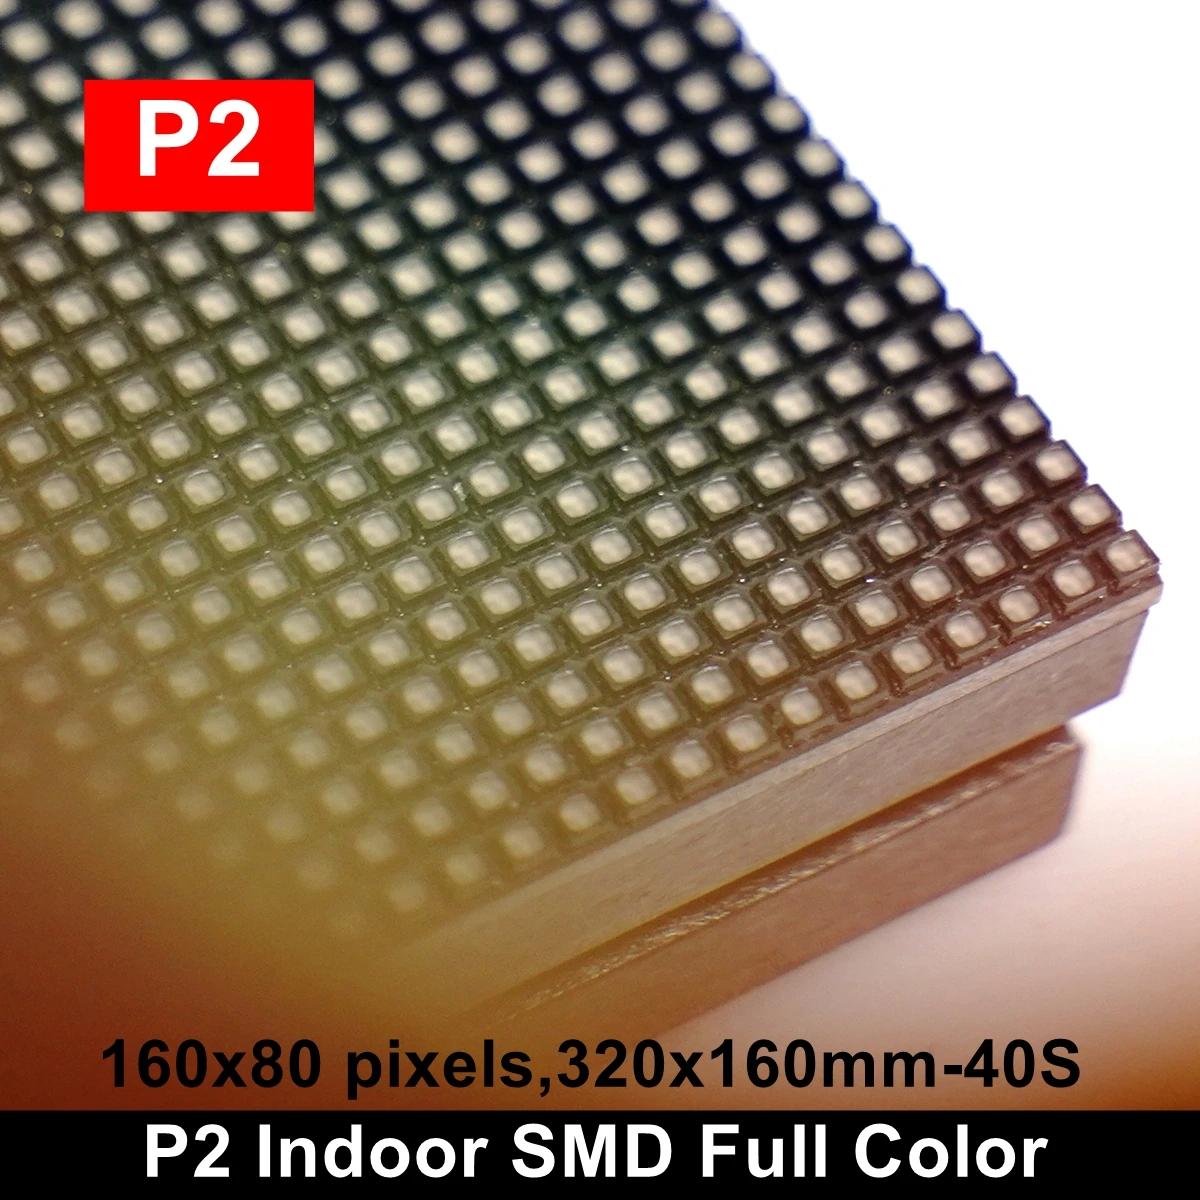 

2pcs/lot P2 Indoor LED Video Display Panel 320*160mm 160*80 Pixels 1/40 Scan 3in1 SMD RGB Full Color Module